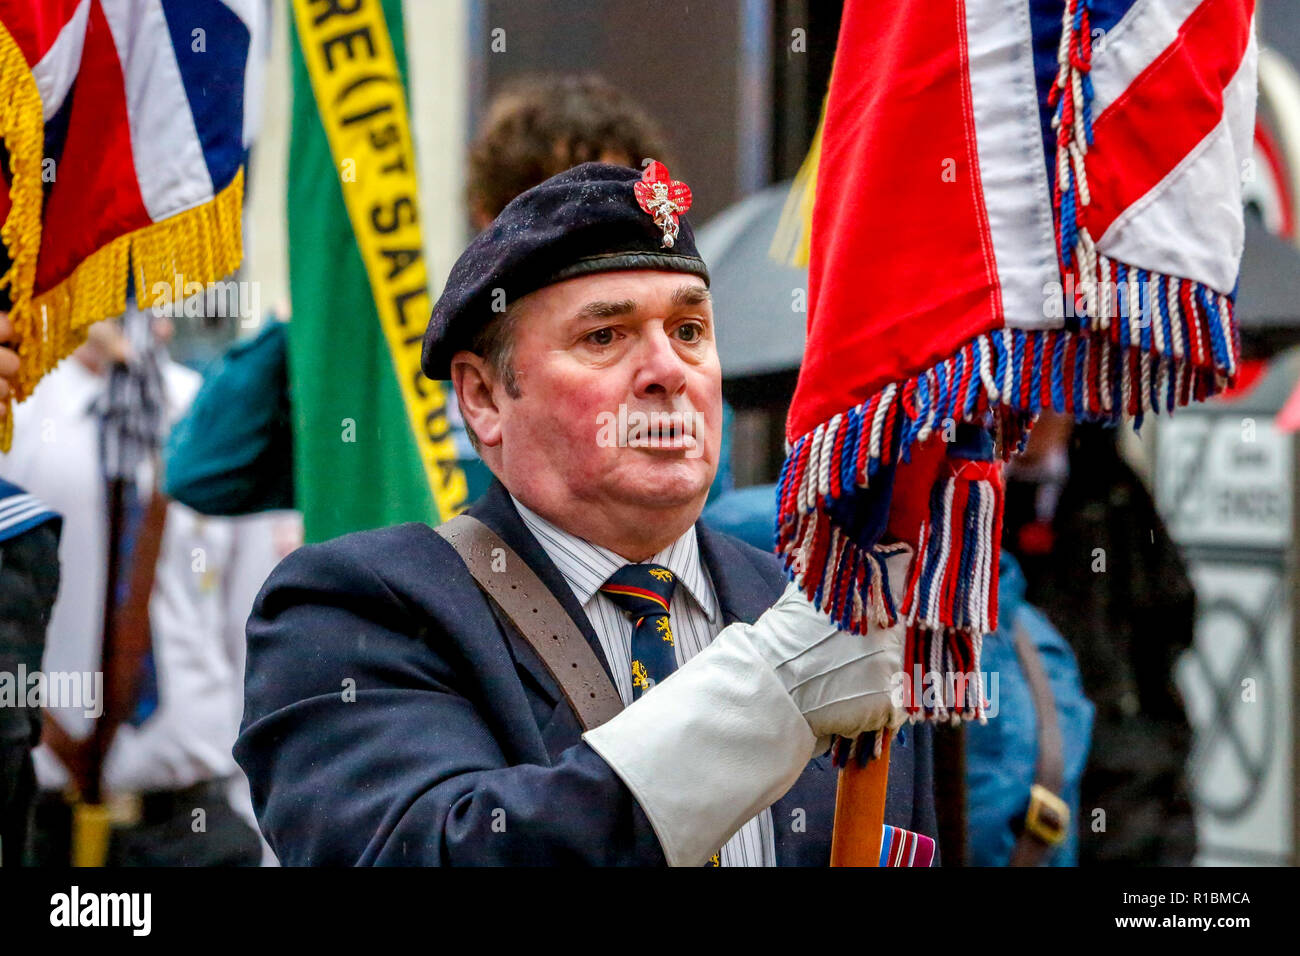 Saltcoats, Ayrshire, UK. 11th Nov, 2018. Heavy rain and strong winds didn't deter over 1000 people turning out at the Cenotaph and war memorial in Saltcoats, Ayrshire, UK to show their respects, lay tributes of wreathes and take part in the Remembrance Day Service commemorating 100 years since the cessation of conflicts in World War 1 Credit: Findlay/Alamy Live News Stock Photo